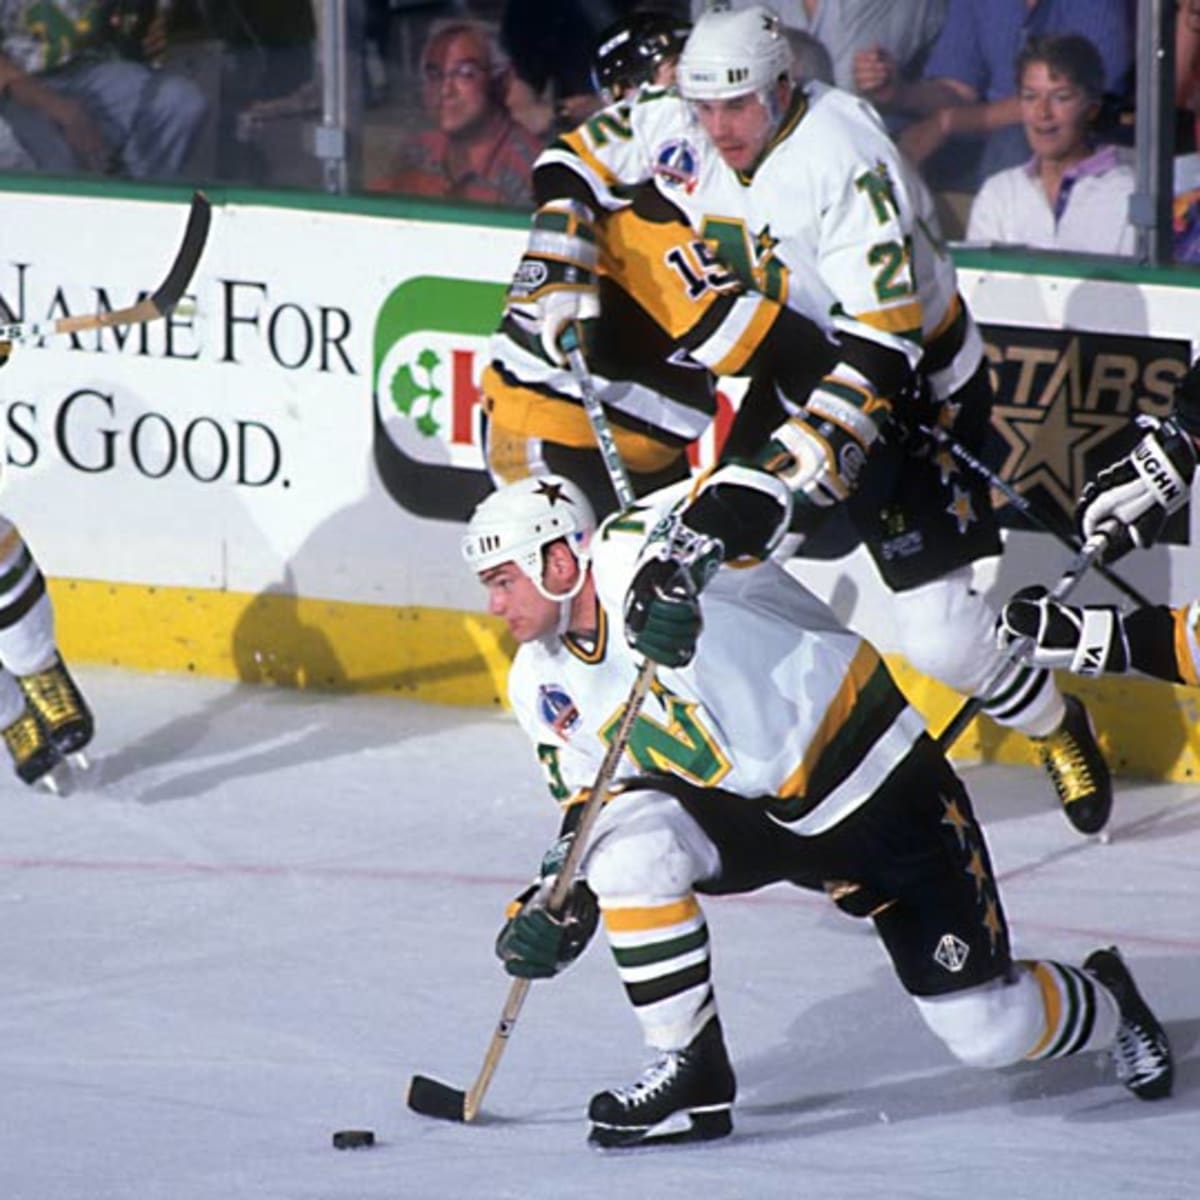 Hall of Famer Mike Modano Thinks the Capitals Will Win the Stanley Cup